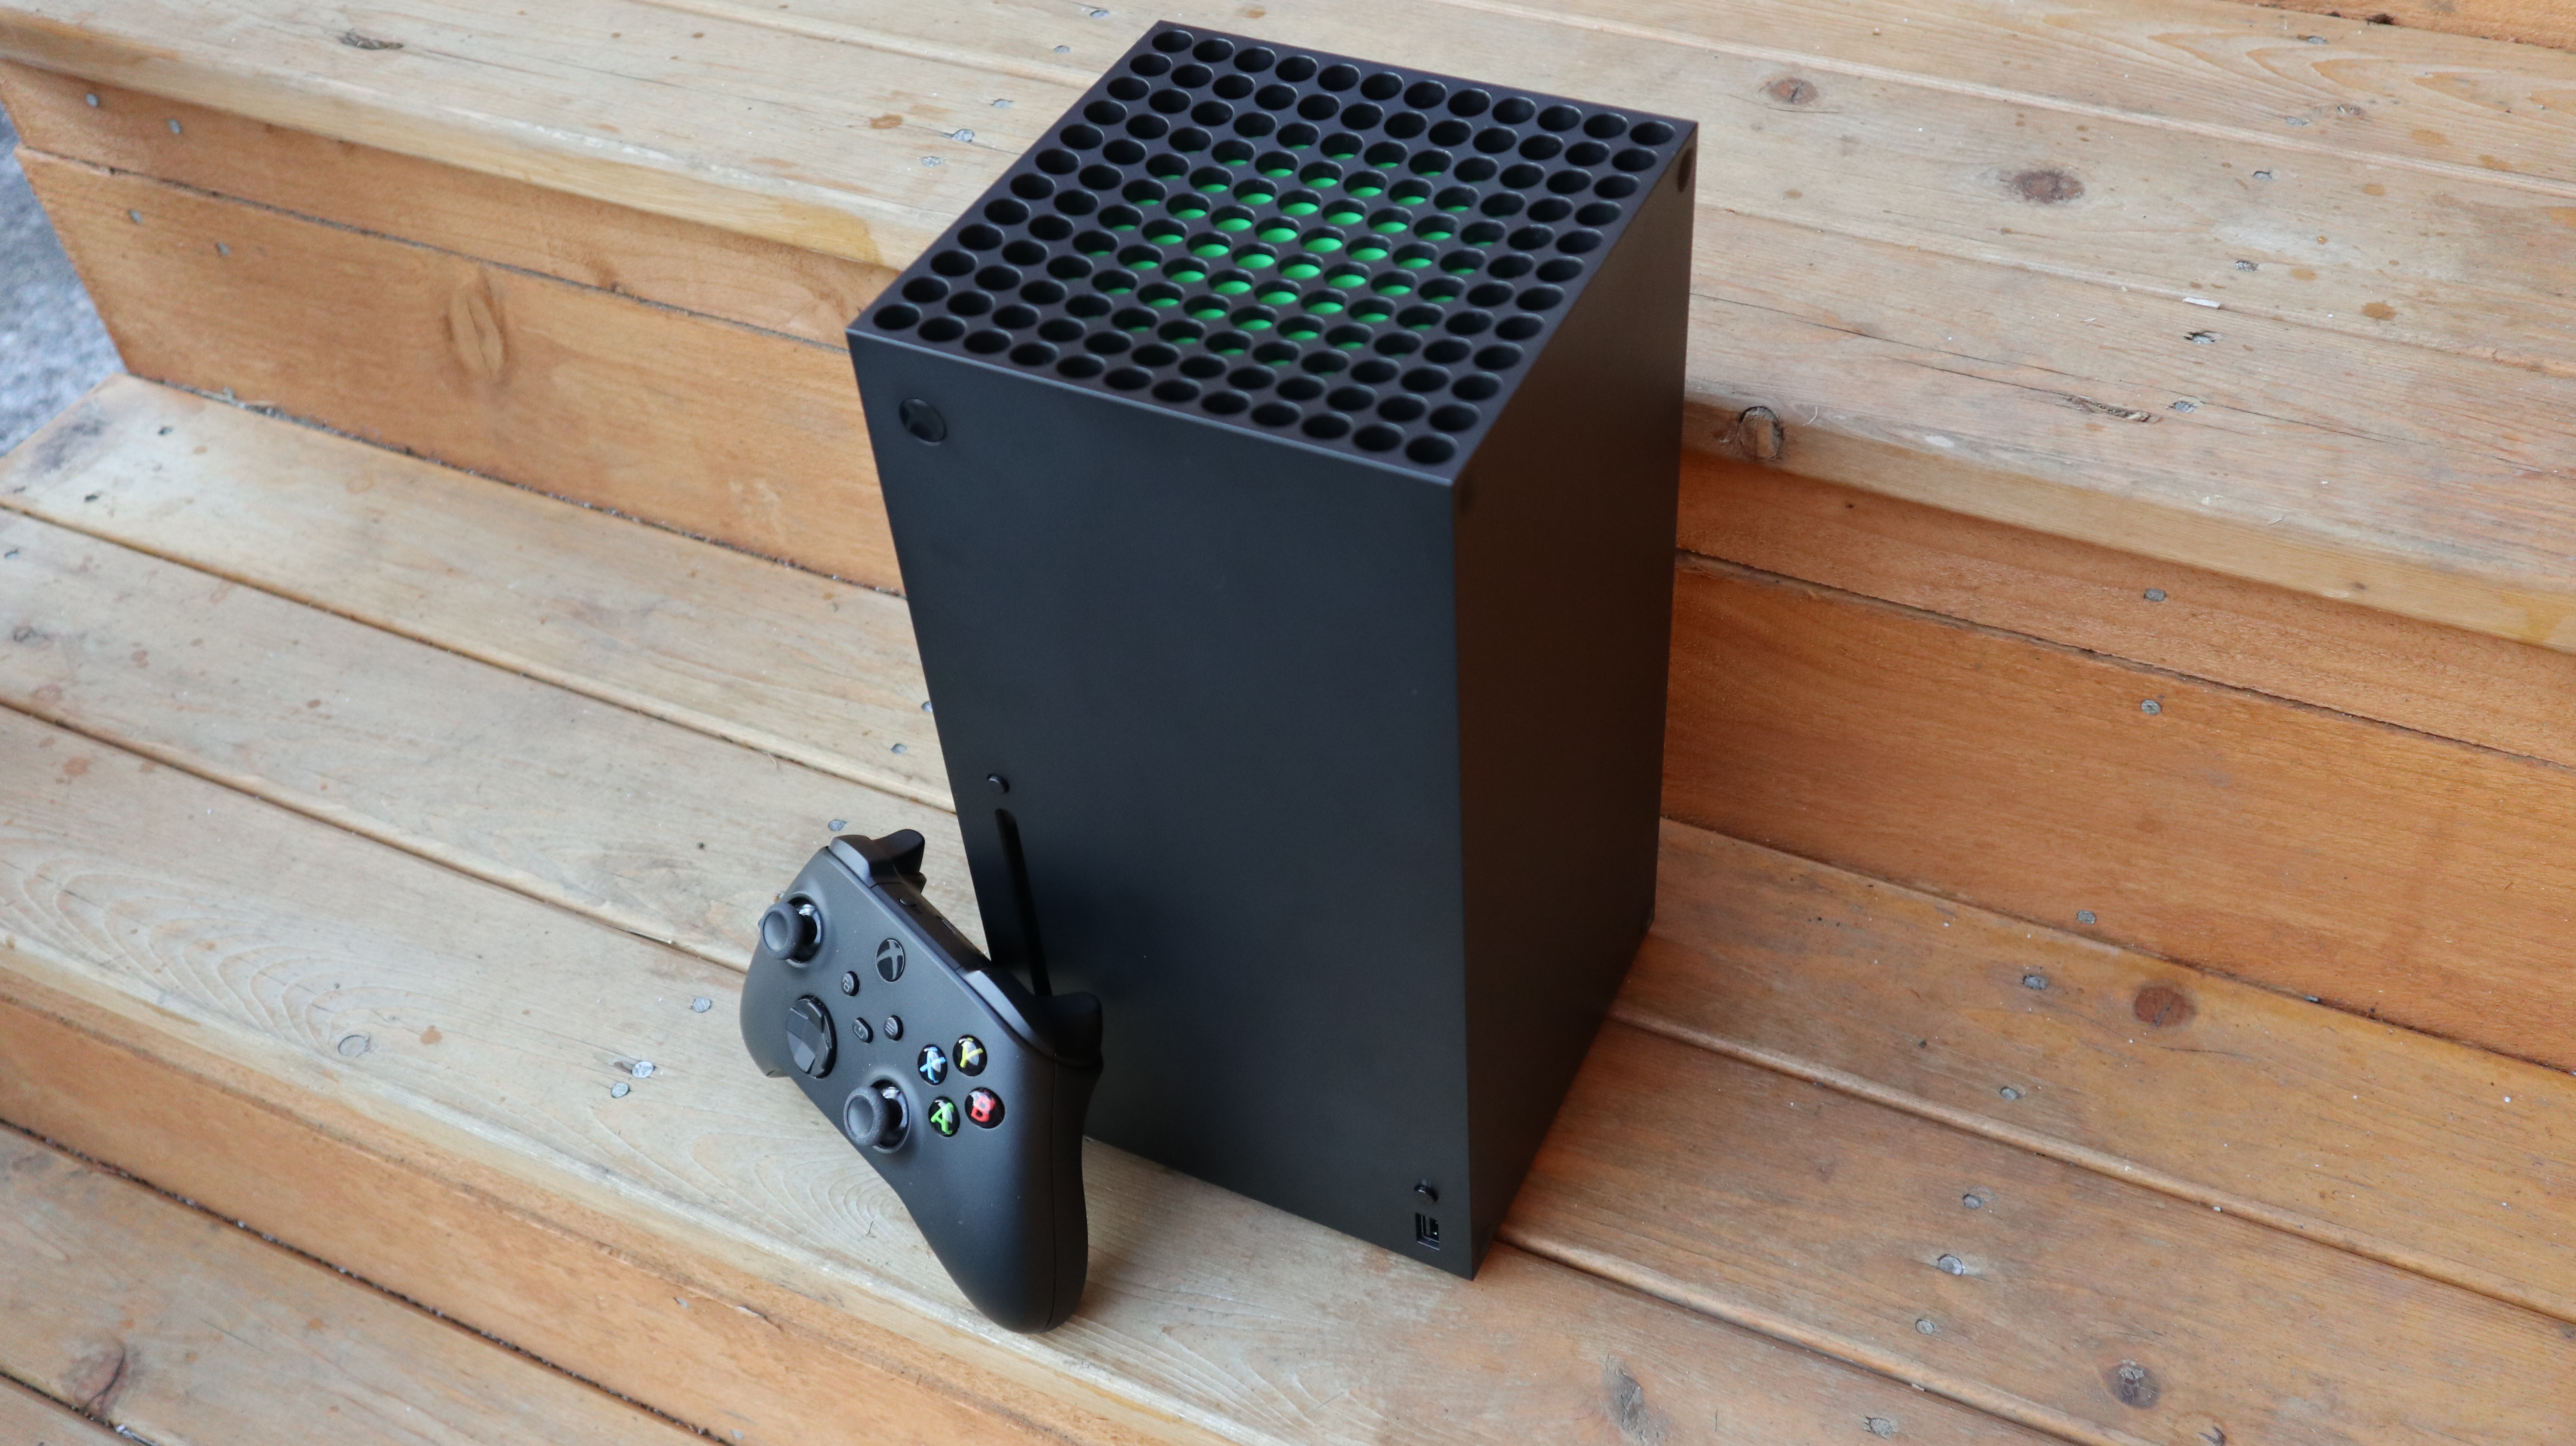 Xbox Series X Review: the $500 Console Is Great, but Not Essential